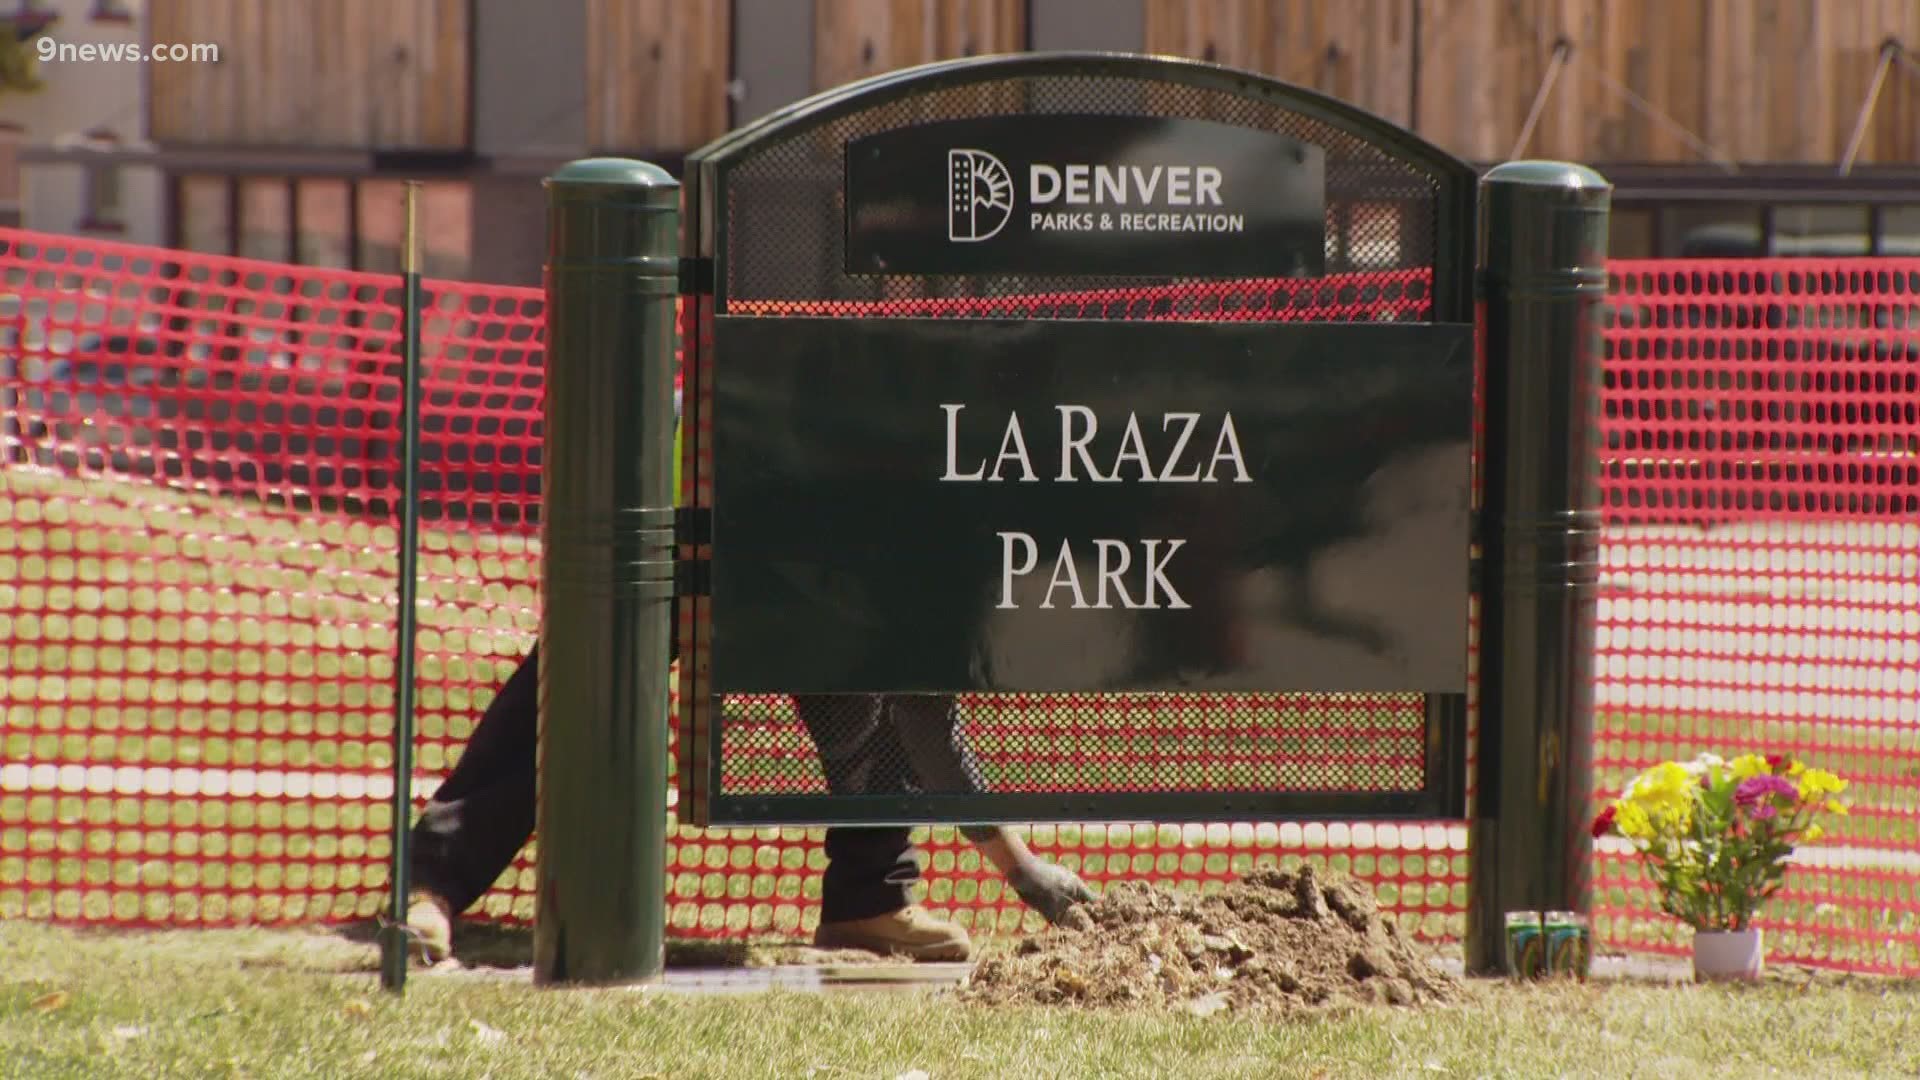 The name change of this park has been a huge deal for people in Denver's Northside.